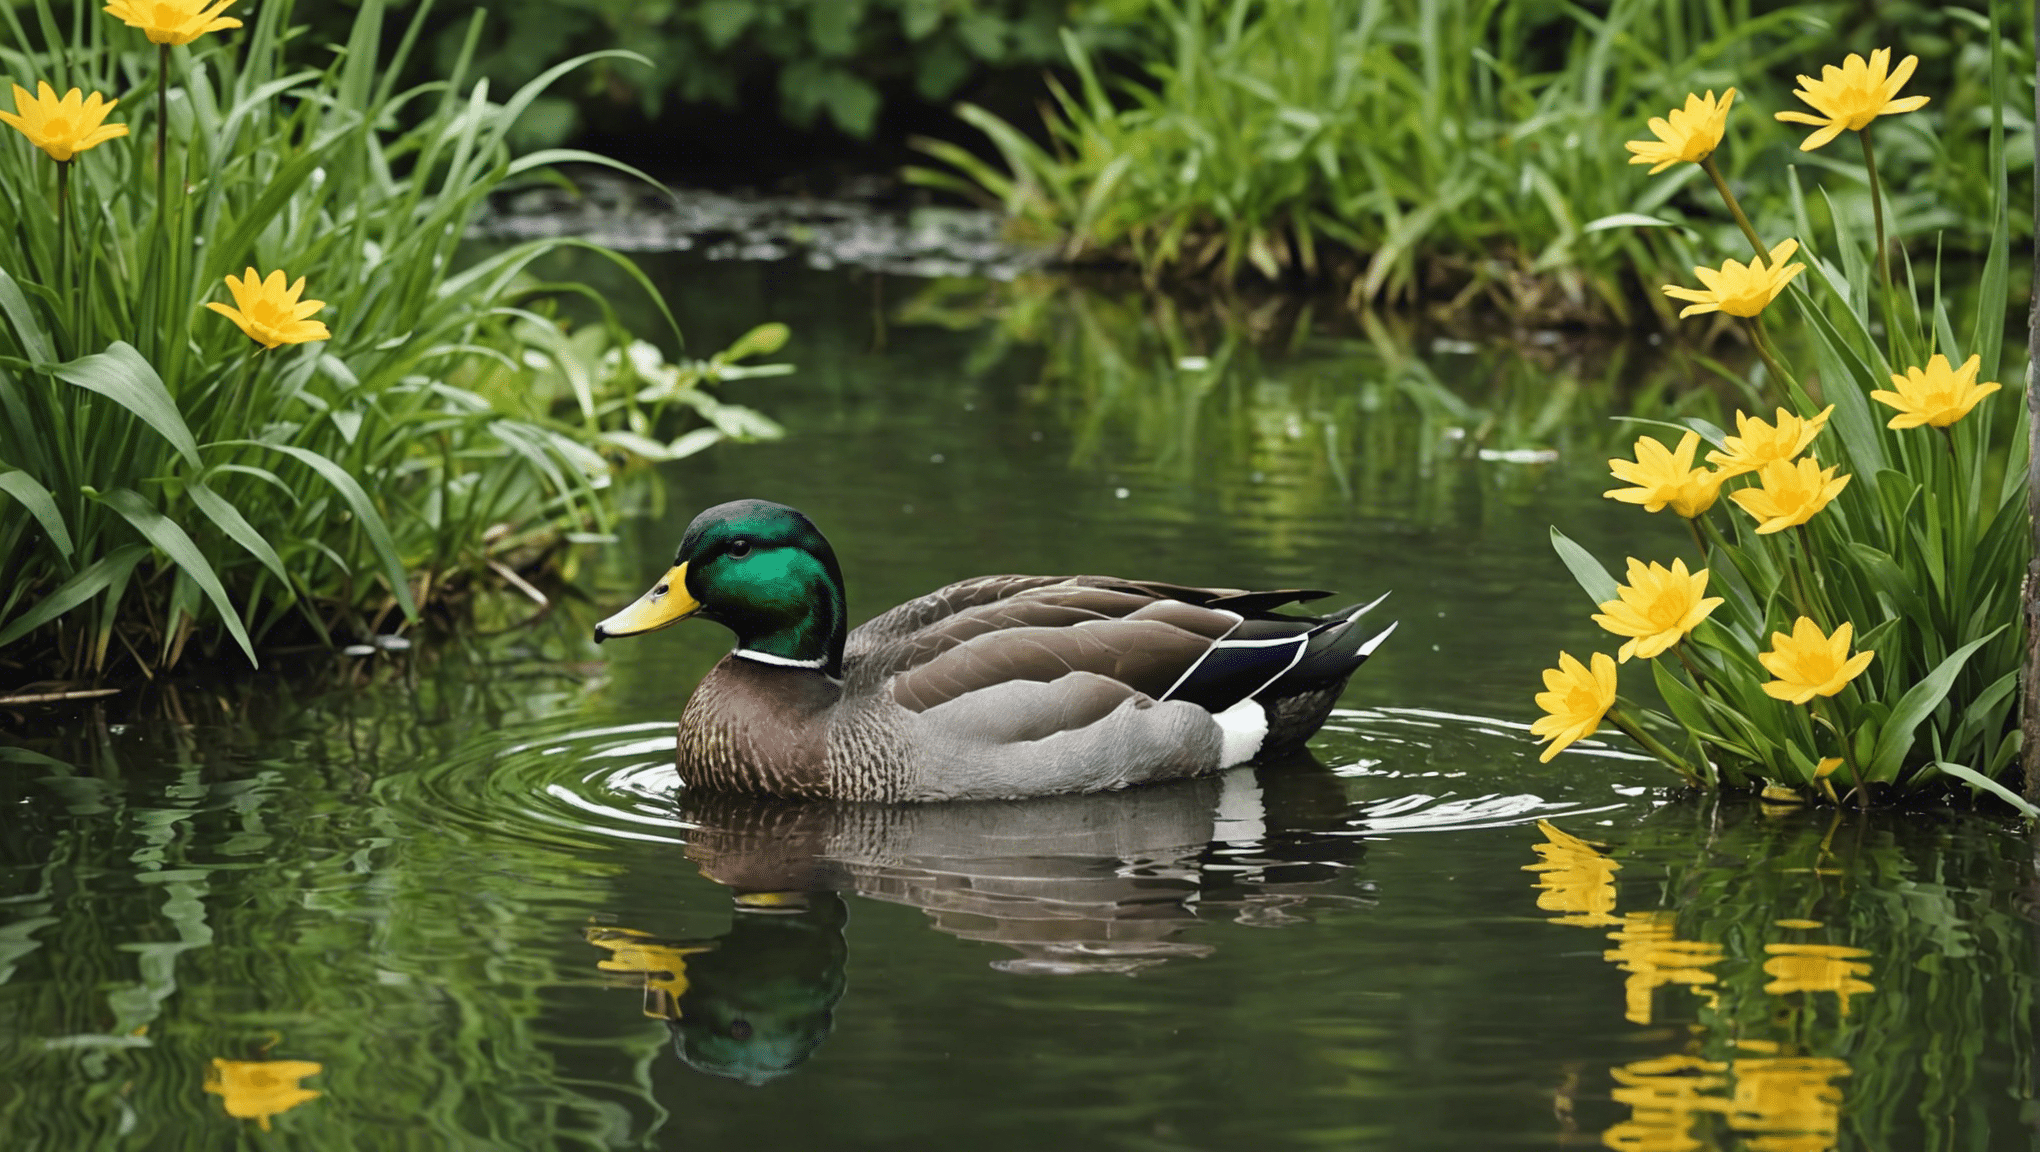 discover the wonders of wild duck habitats and sanctuaries in this insightful exploration of a wild duck's haven.